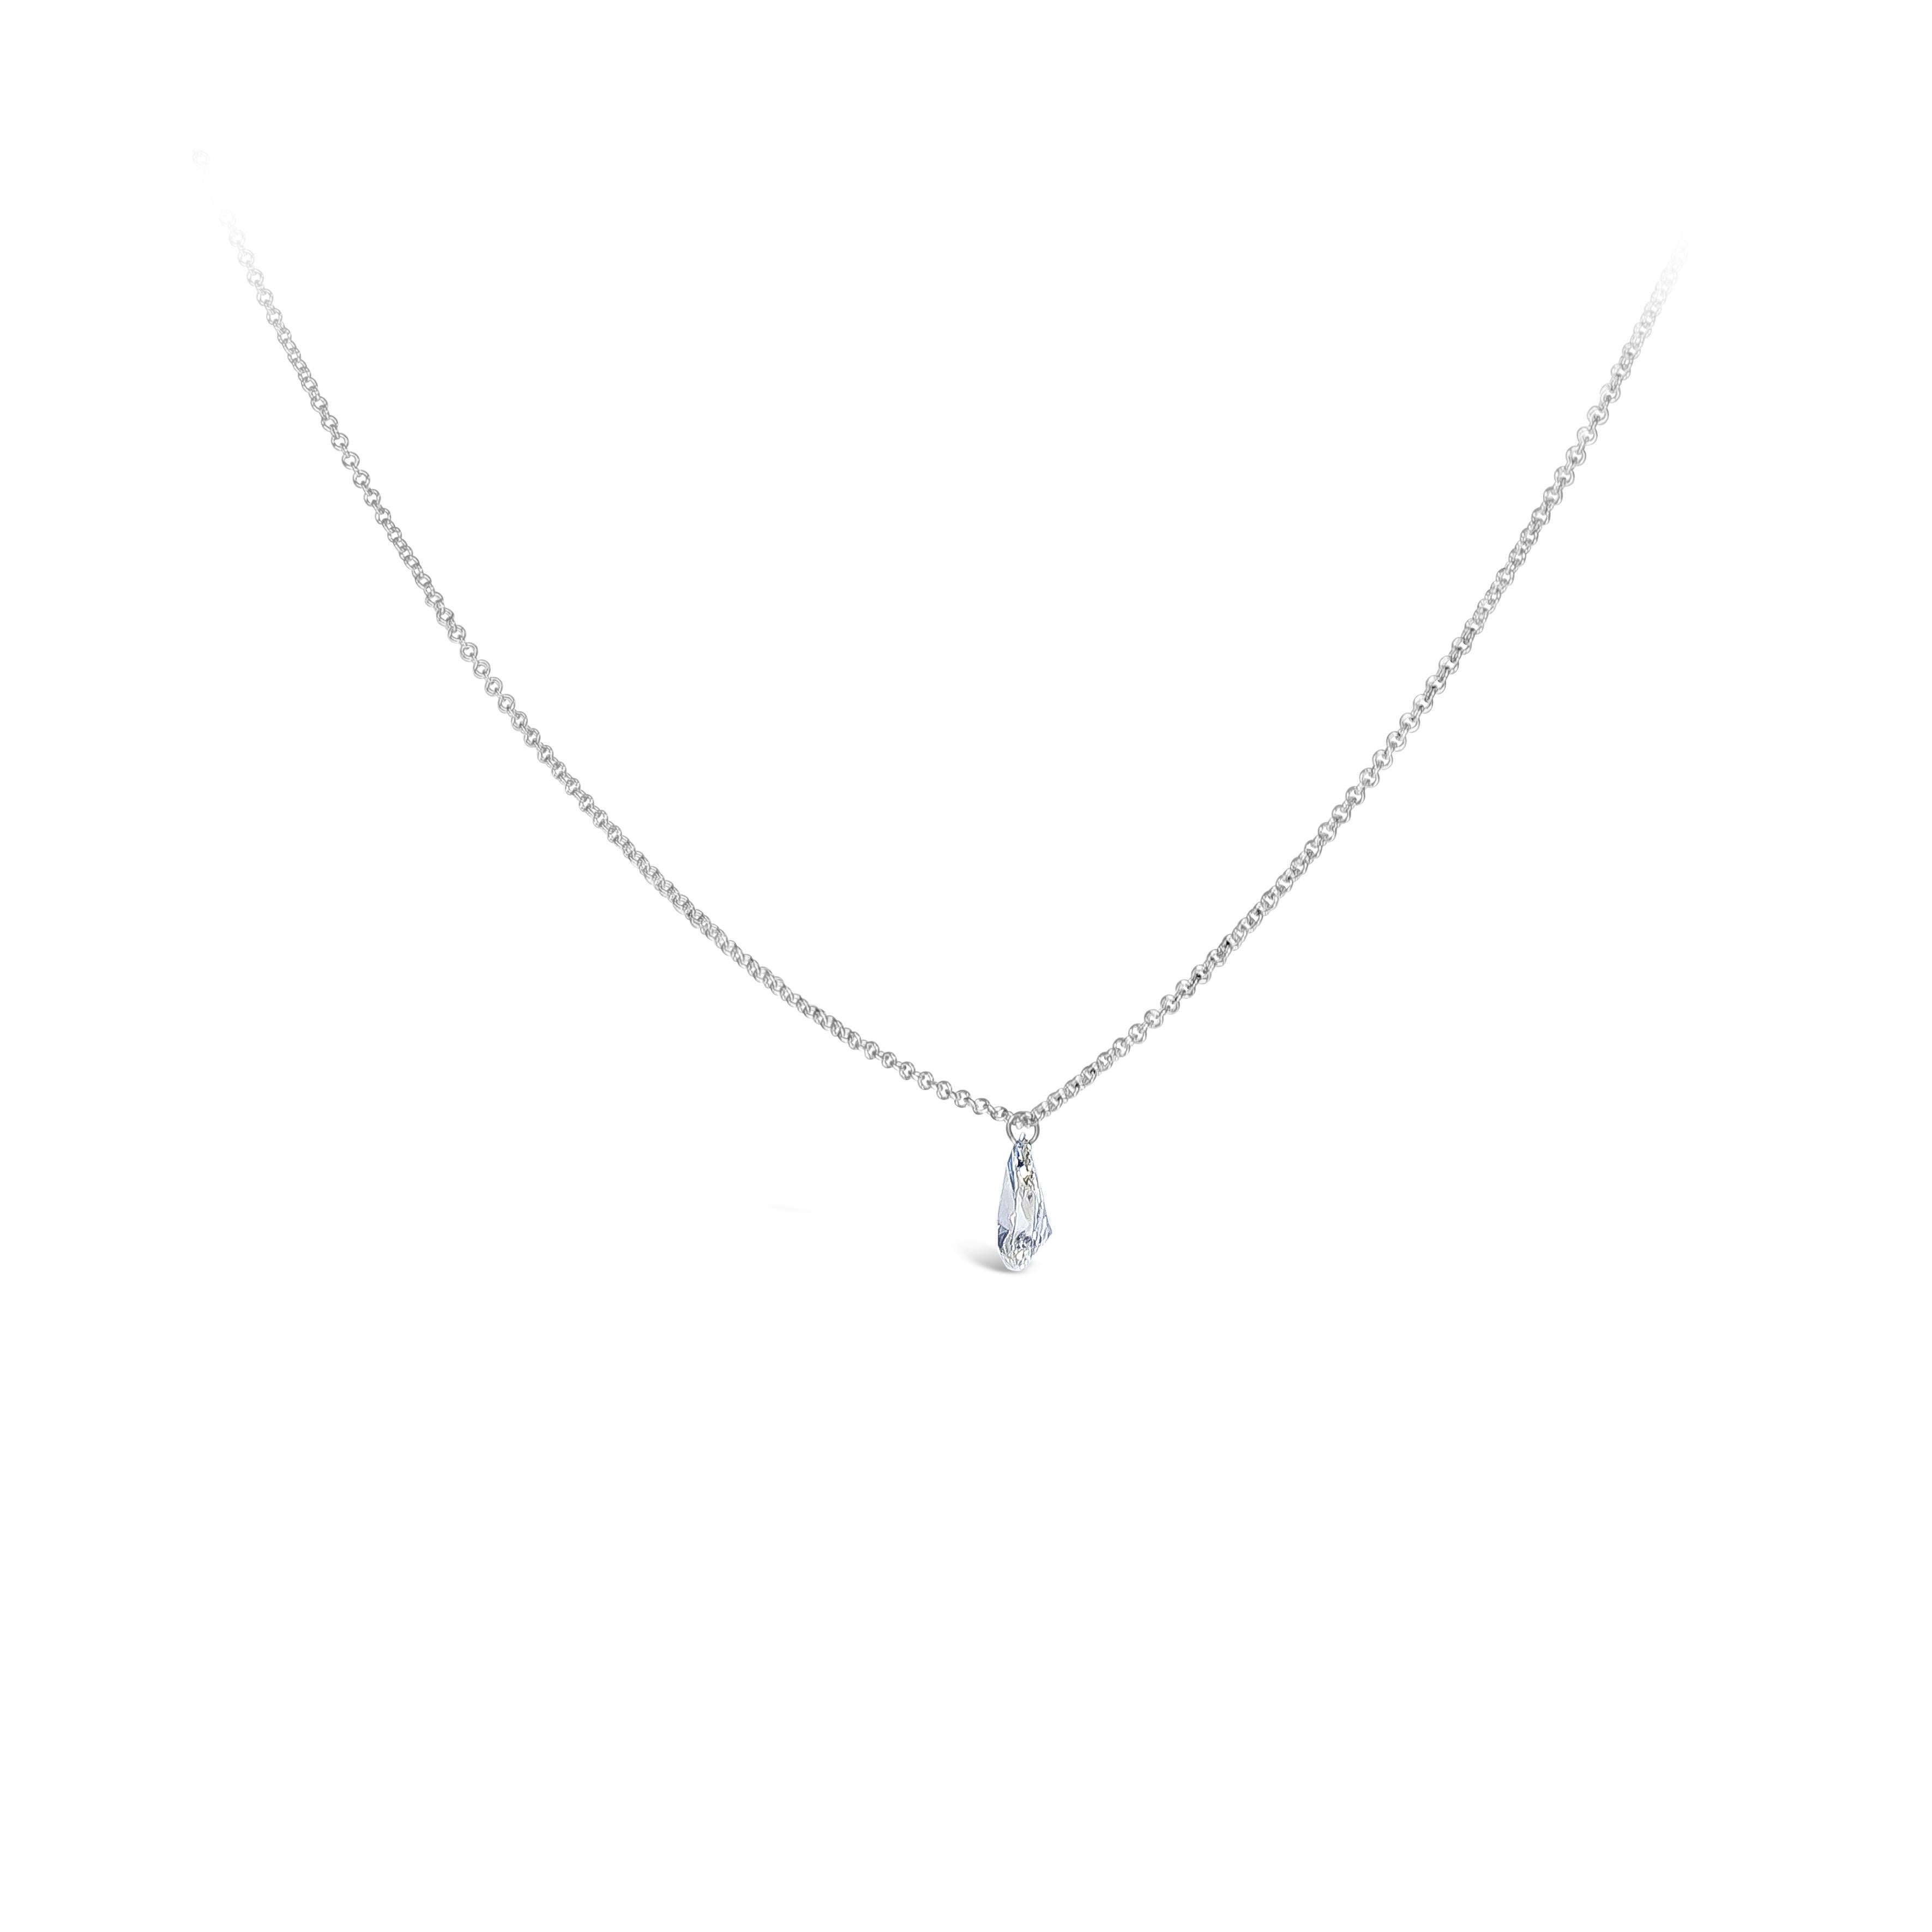 This unique and simple pendant necklace features 0.67 carat total pear shape diamond, L Color and VS in Clarity. Suspended on a adjustable 18inch, 18k White Gold chain.

Style available in different price ranges. Prices are based on your selection.